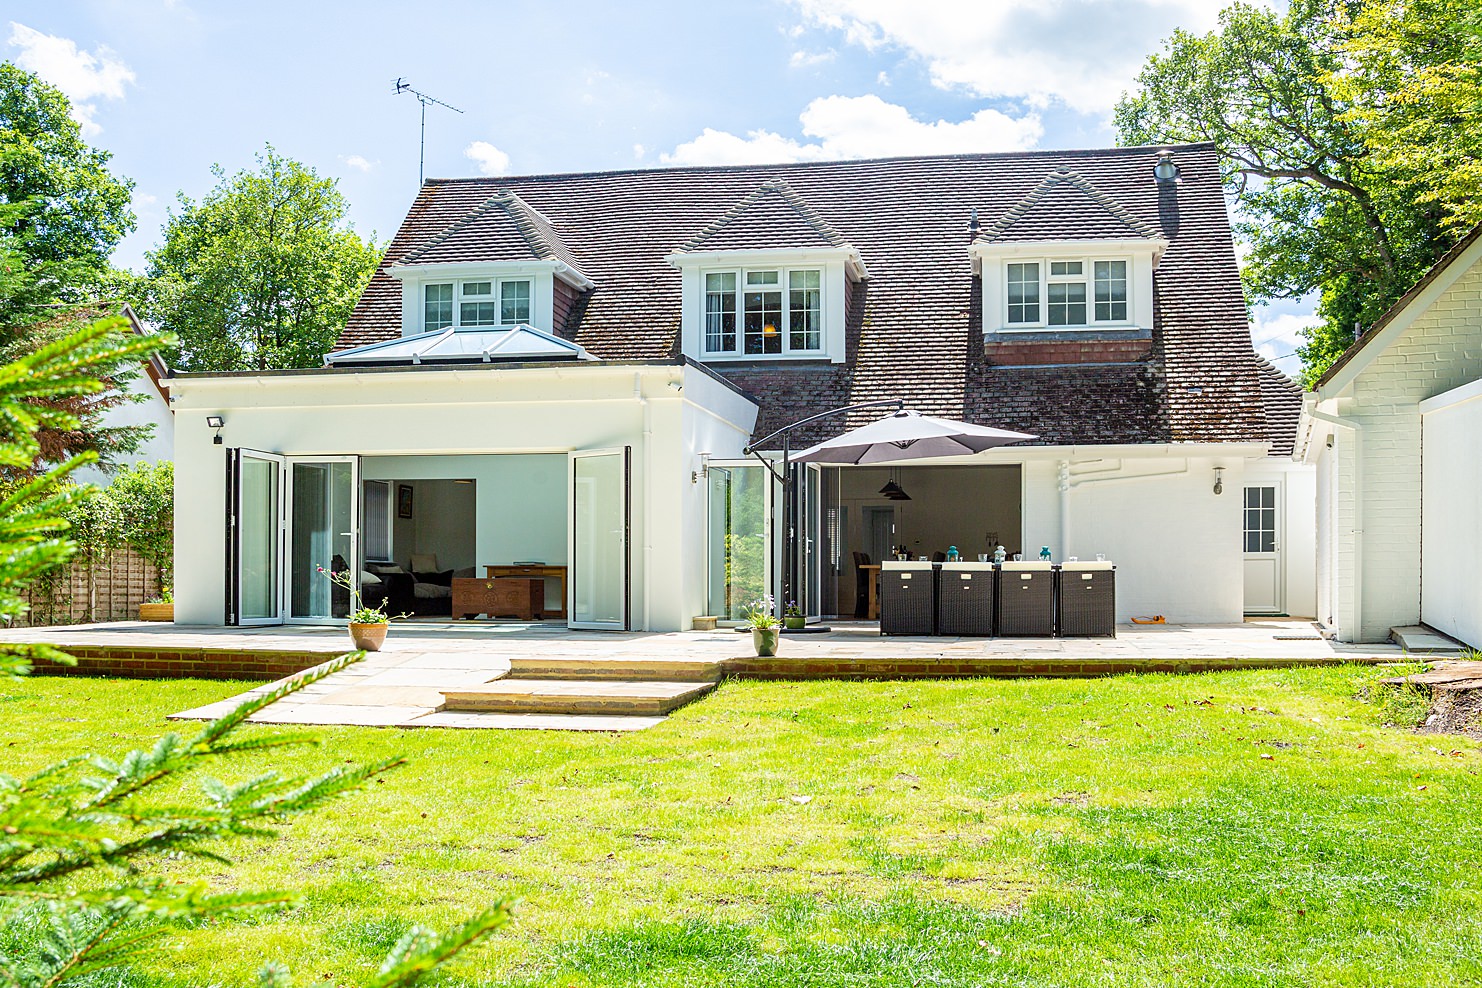 property photography in West Sussex